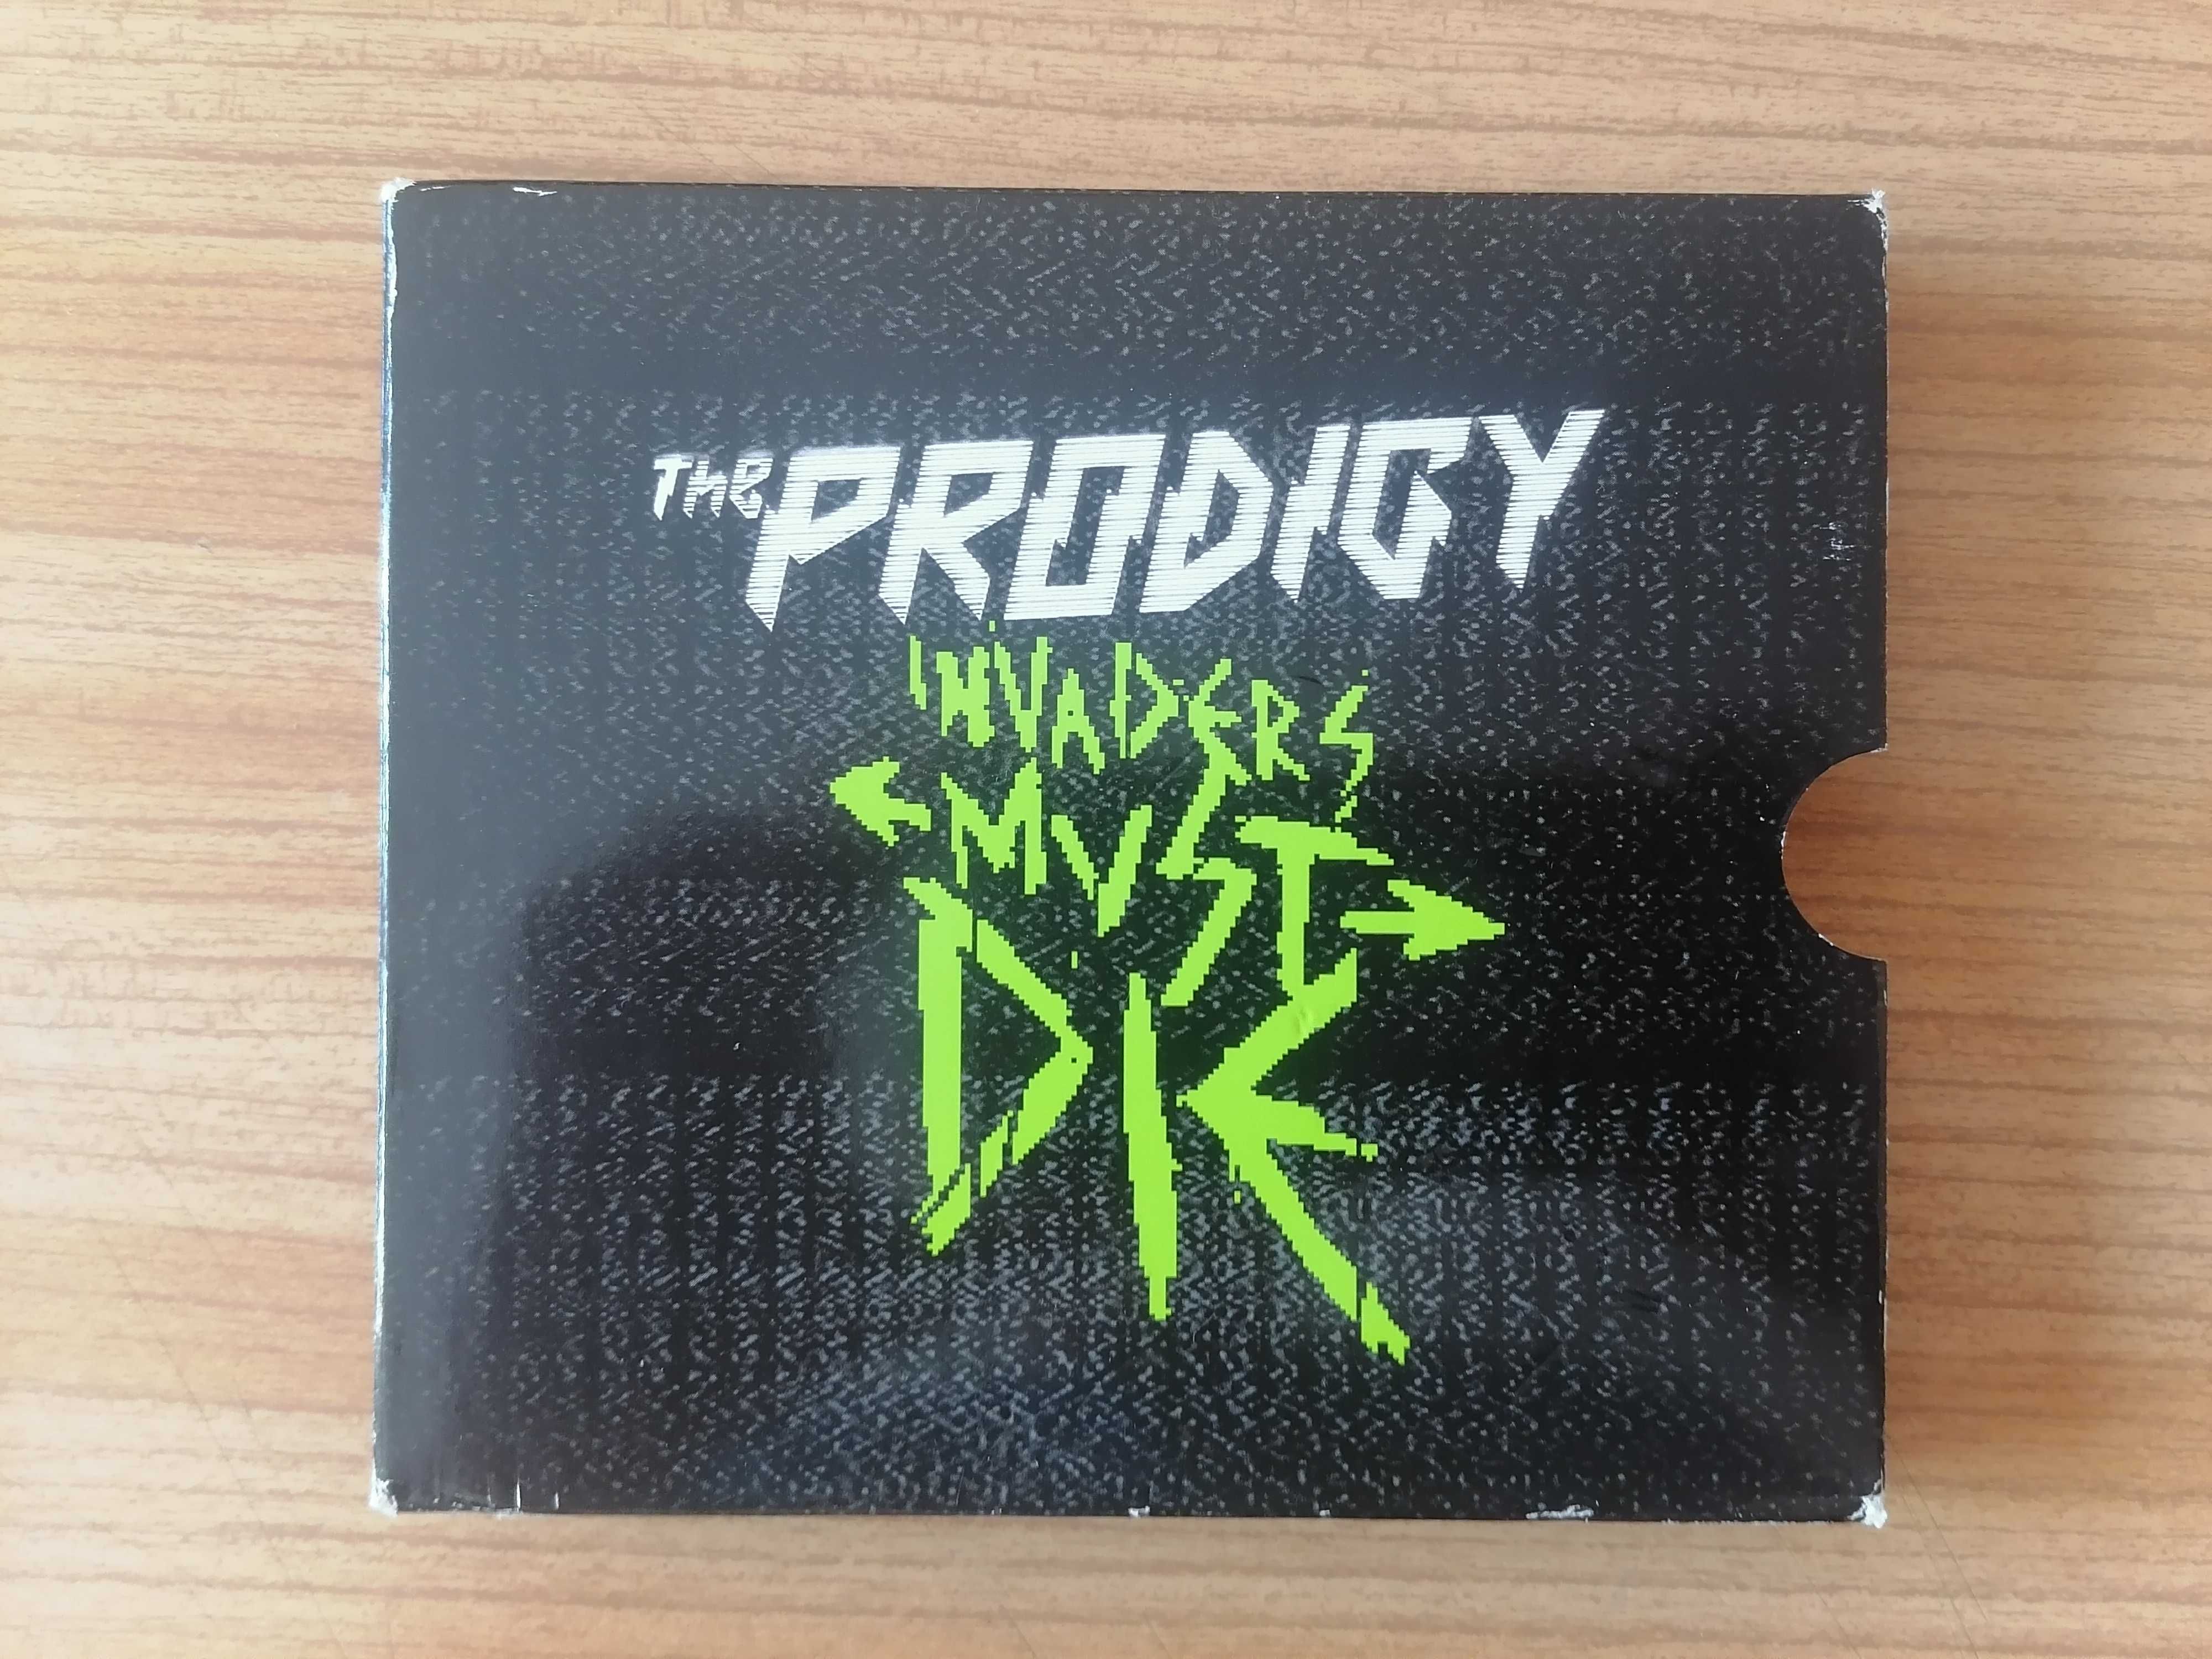 The Prodigy : Invaders Must Die 3CD Special Album 2CD+1DVD (2009) UK